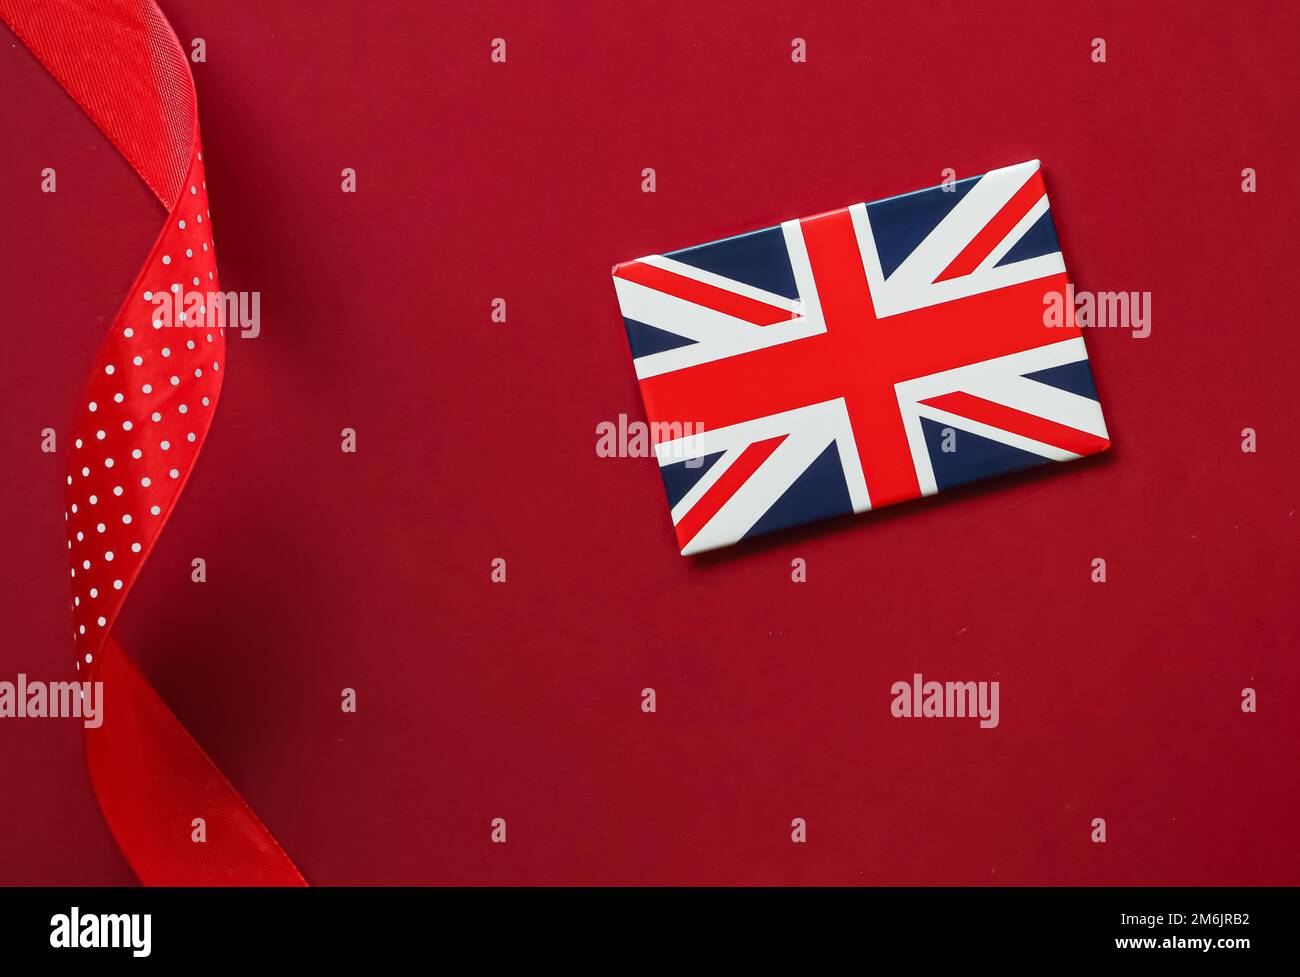 Union Jack flag of Great Britain on red background, Queen\'s ...